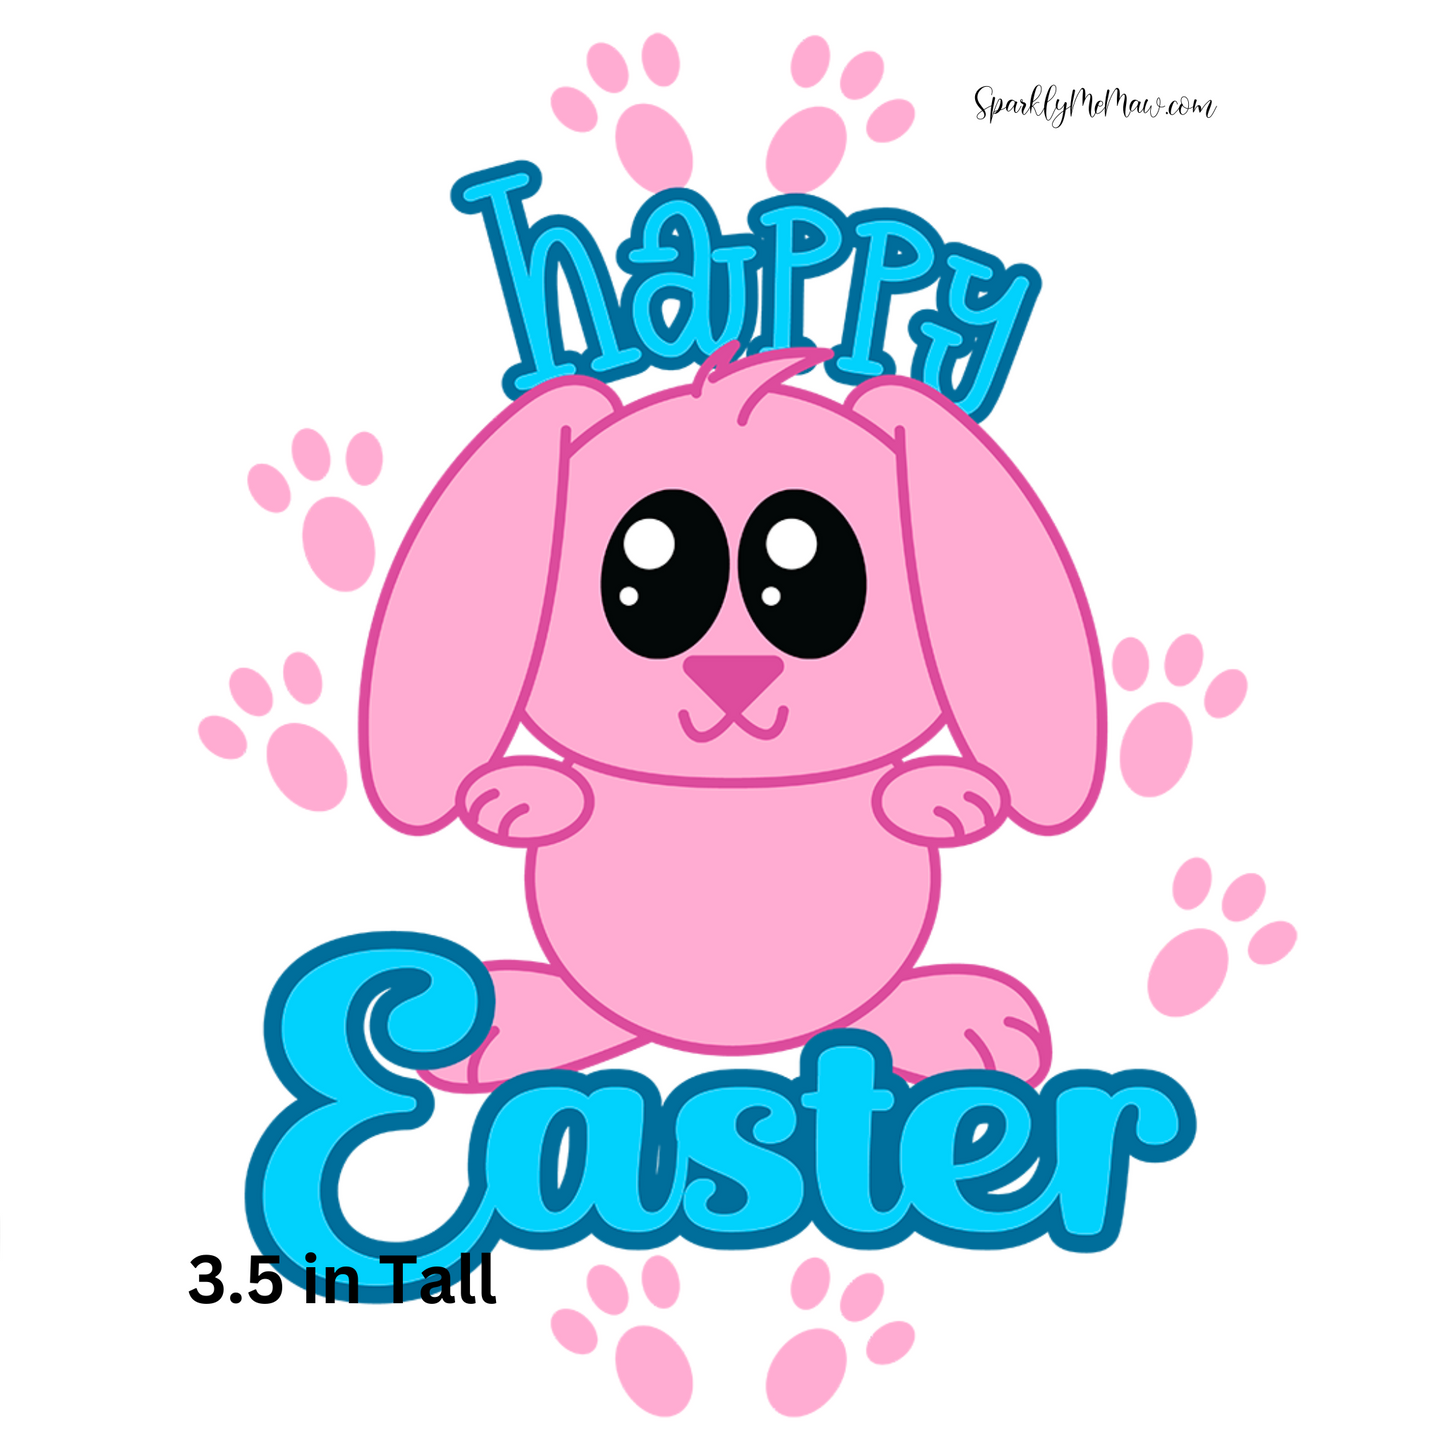 Happy Easter Pink/blue Bunny UV 3.5 inch decal